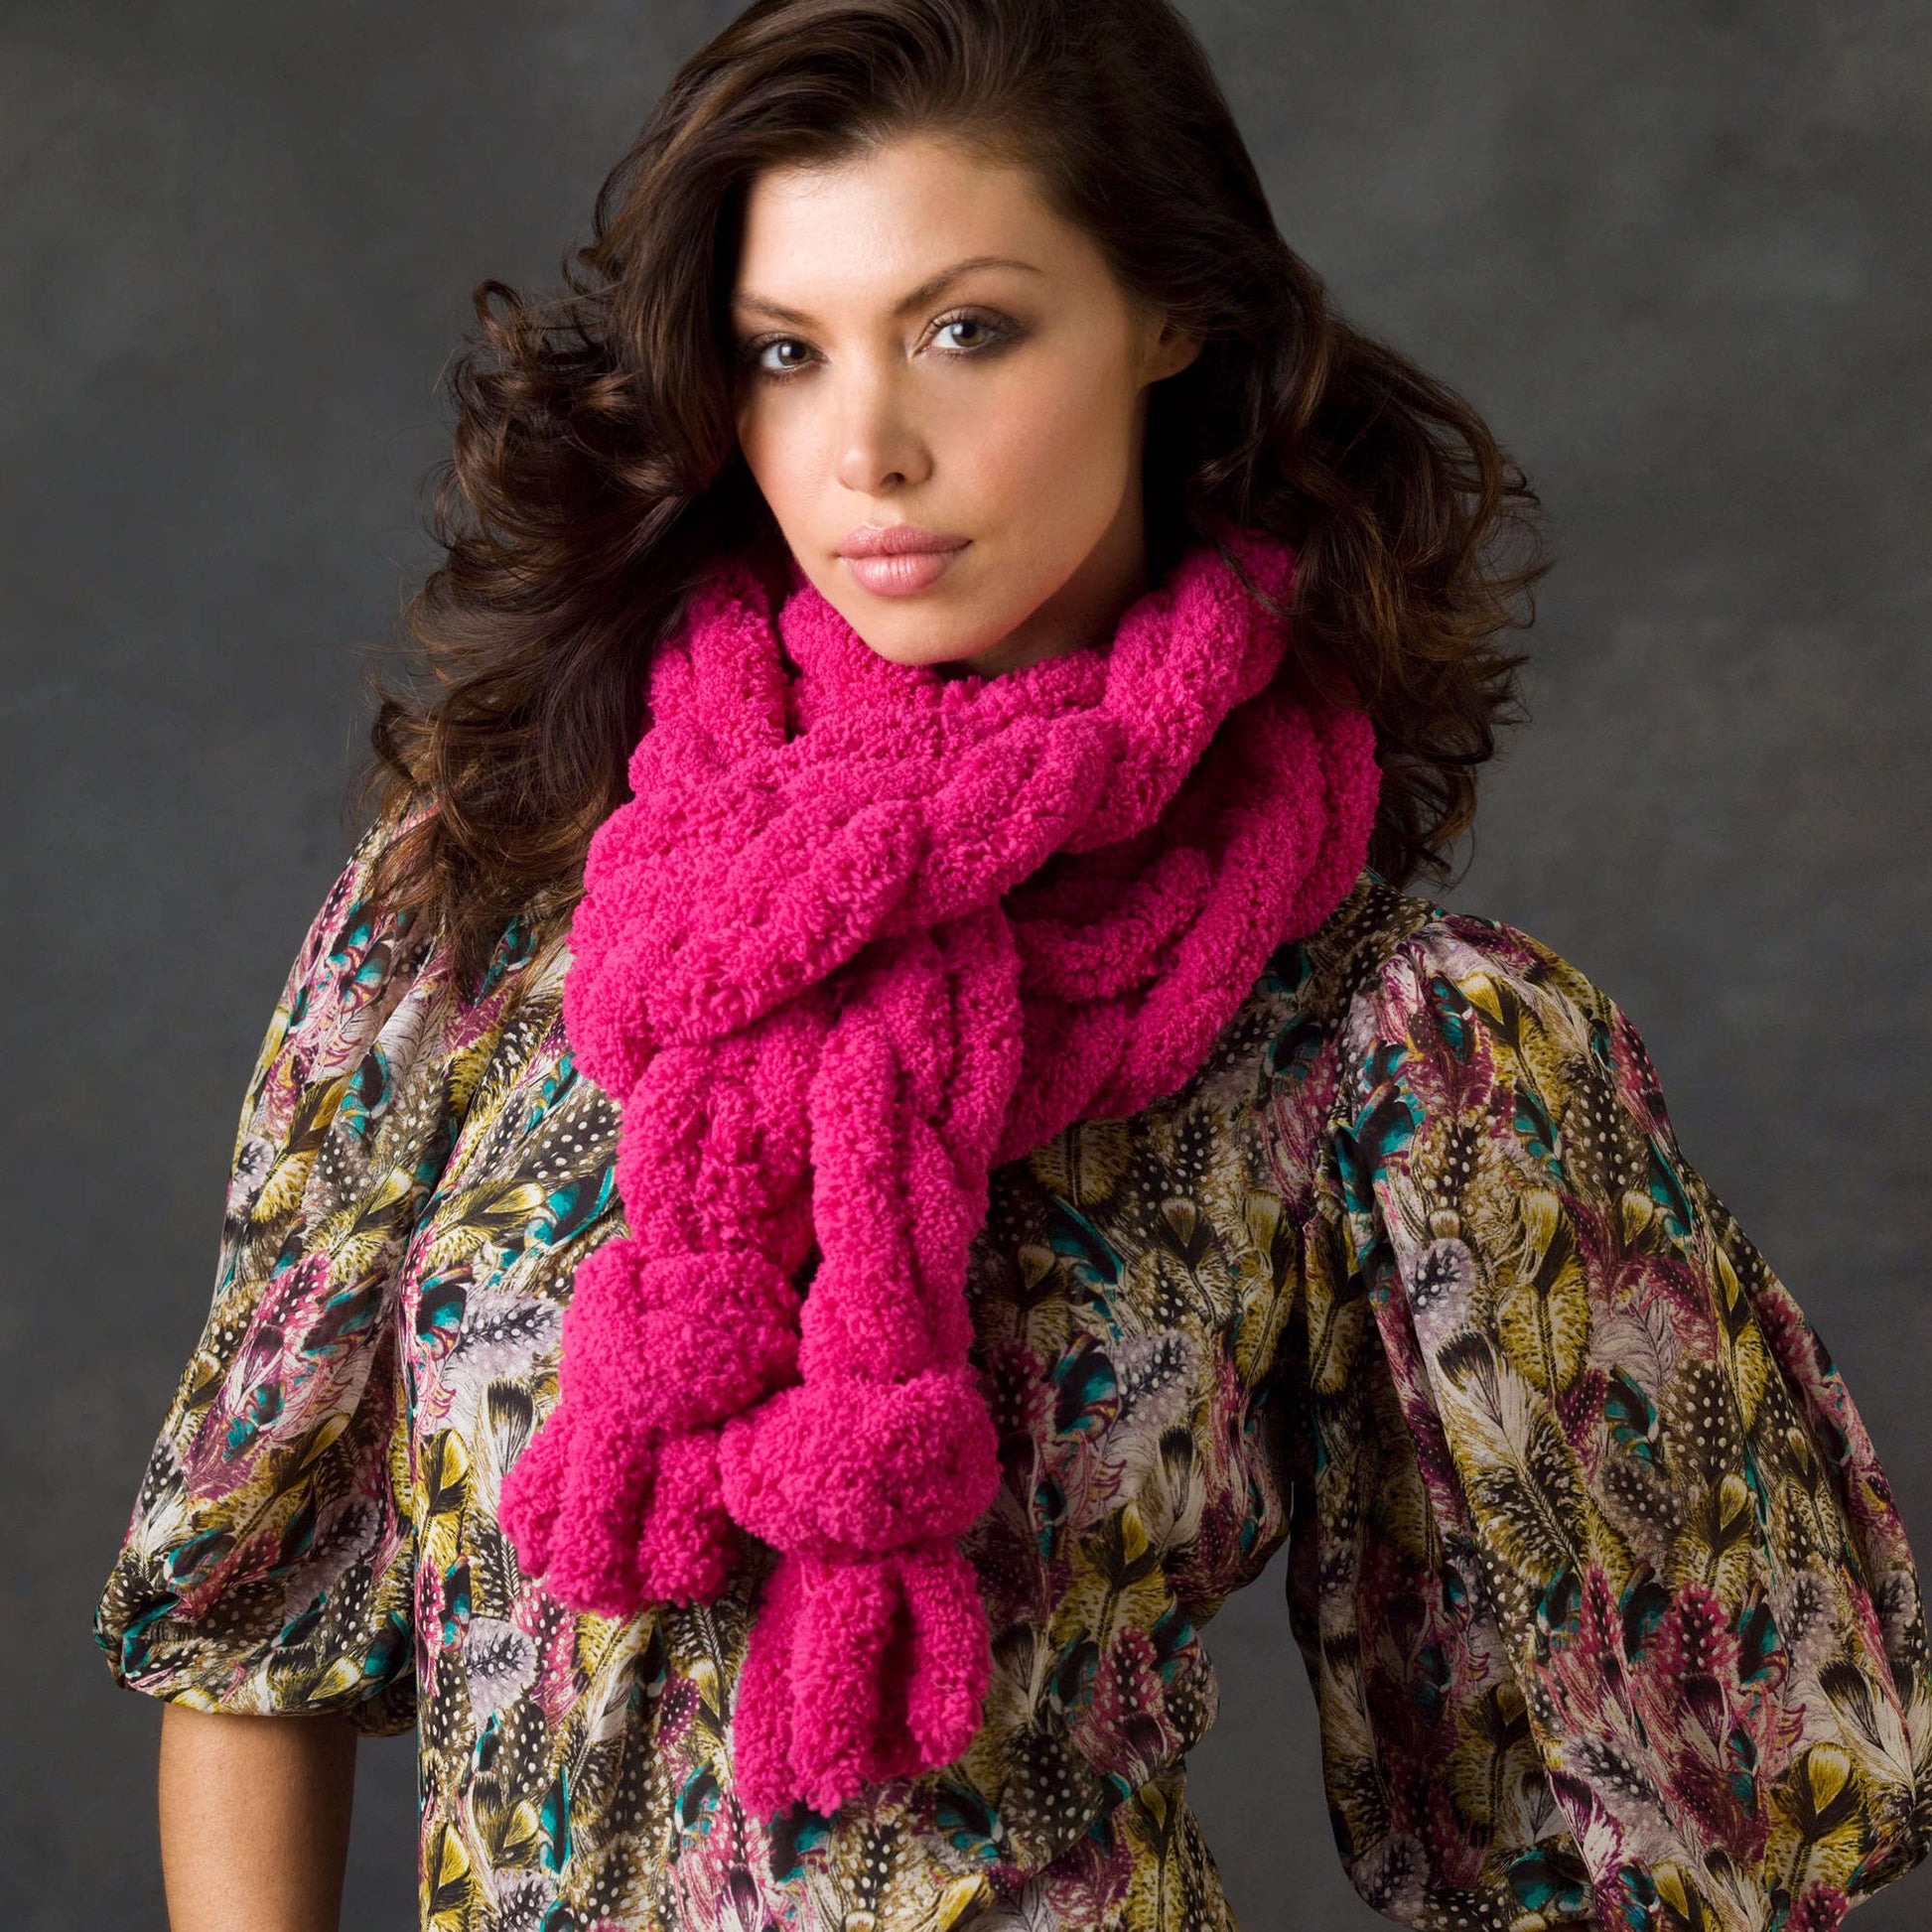 Free Red Heart Craft One-Ball Braided Scarf Pattern